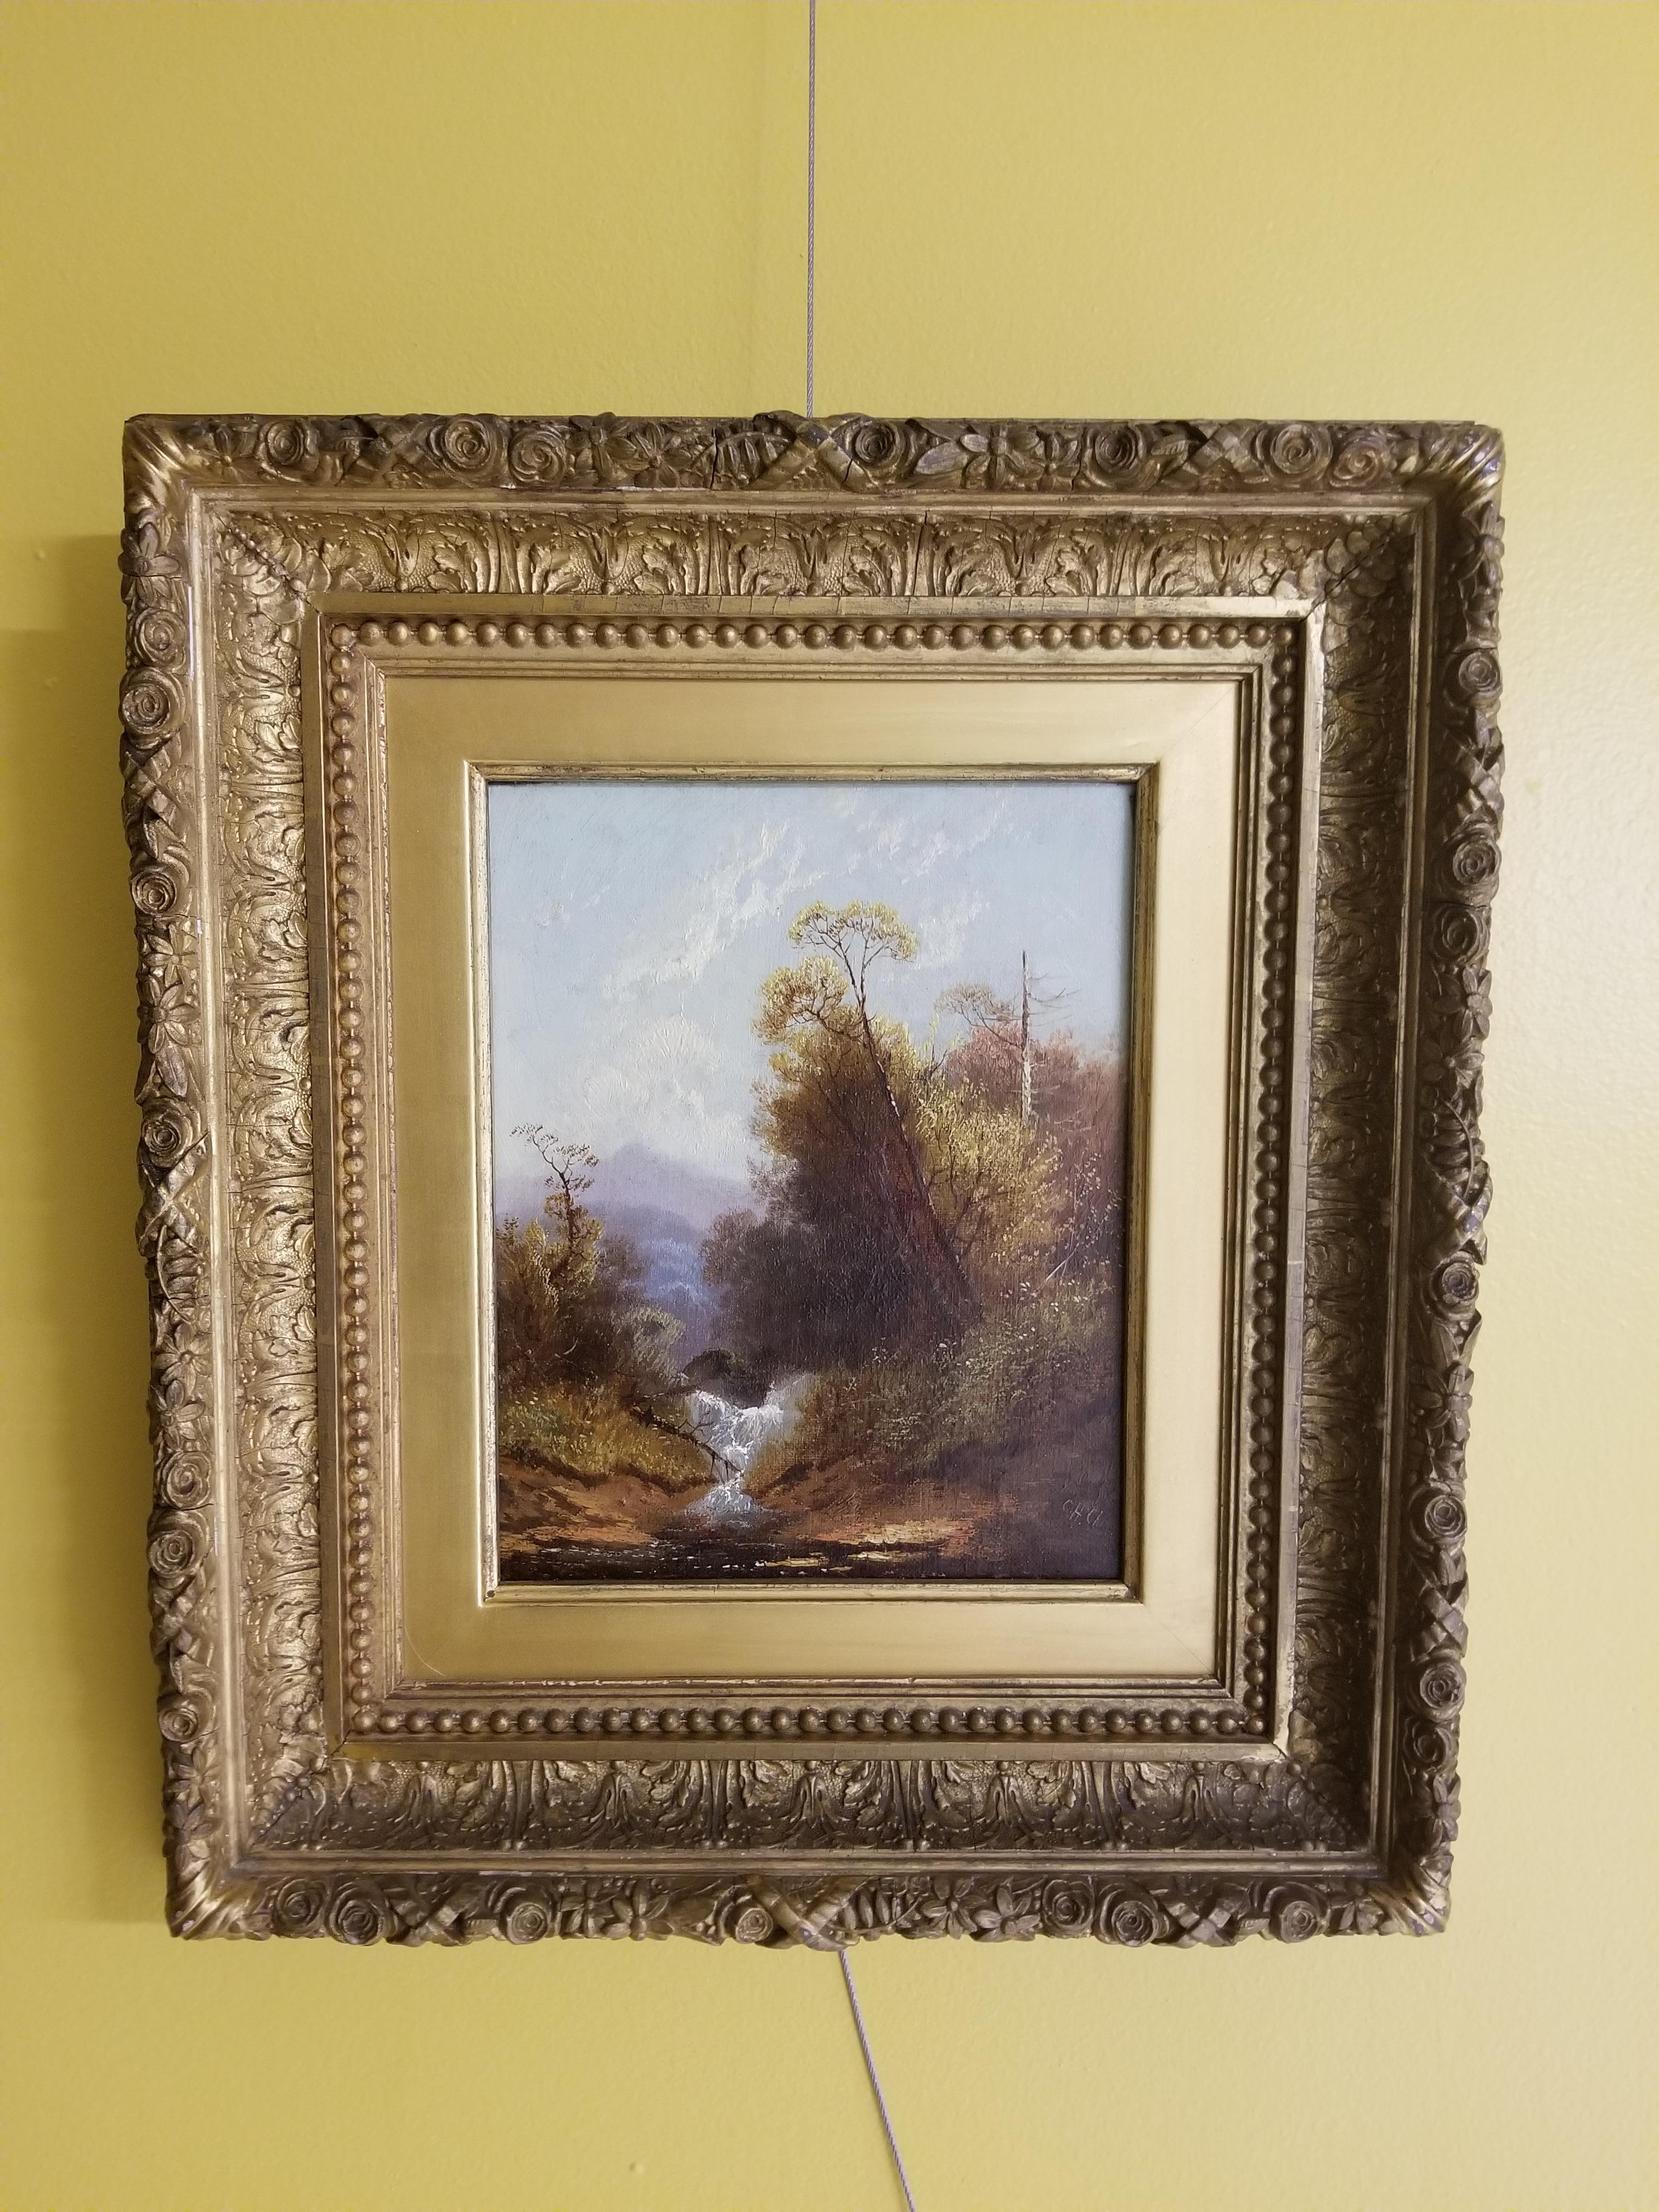 Adirondack Landscape - Painting by Charles H. Chapin